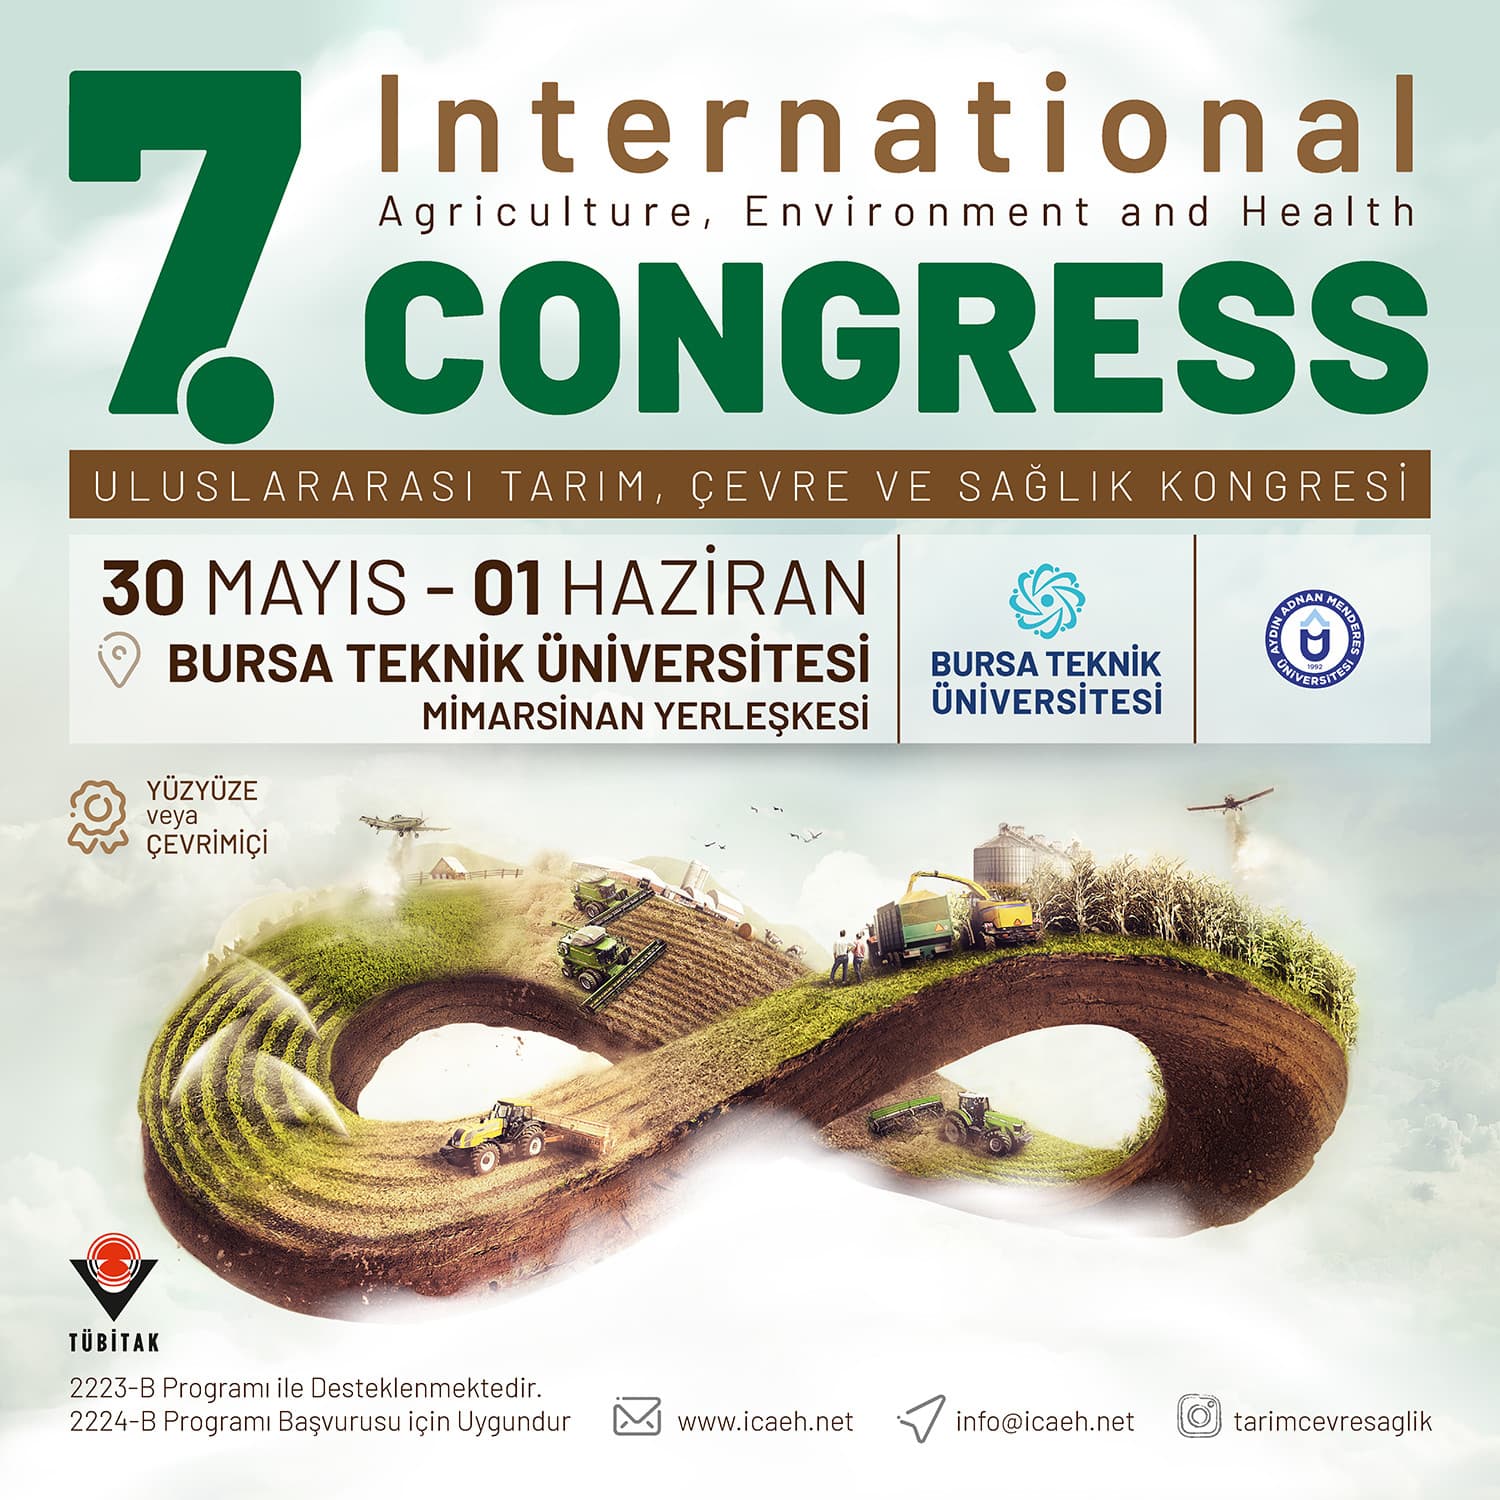 7th International Agricultur, Environment and Health Congress